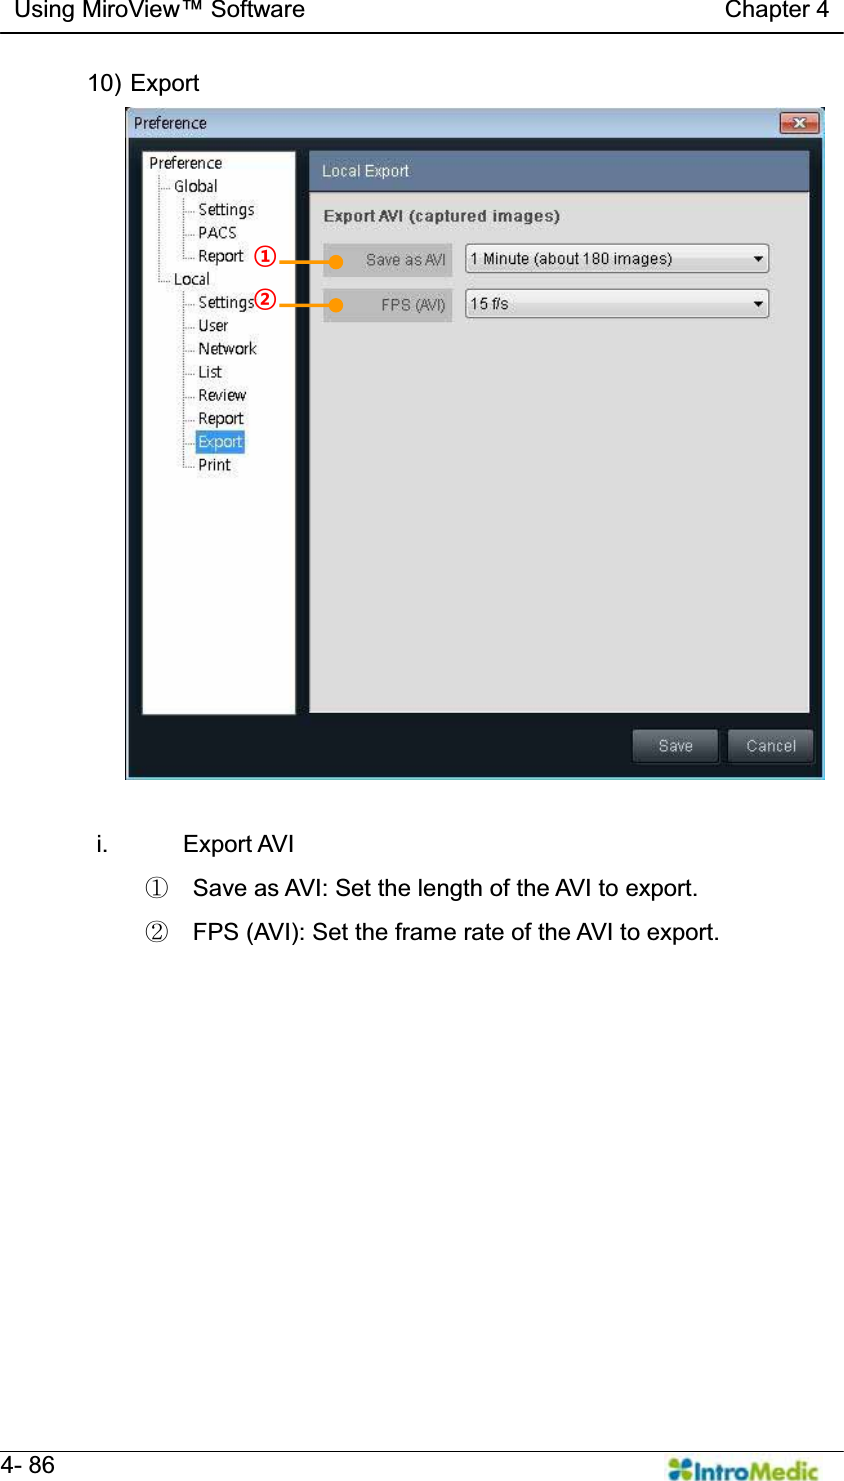   Using MiroView Software                                   Chapter 4   4- 86 10) Export  i. Export AVI ཛ  Save as AVI: Set the length of the AVI to export. ཛྷ  FPS (AVI): Set the frame rate of the AVI to export.  ¢ £ 